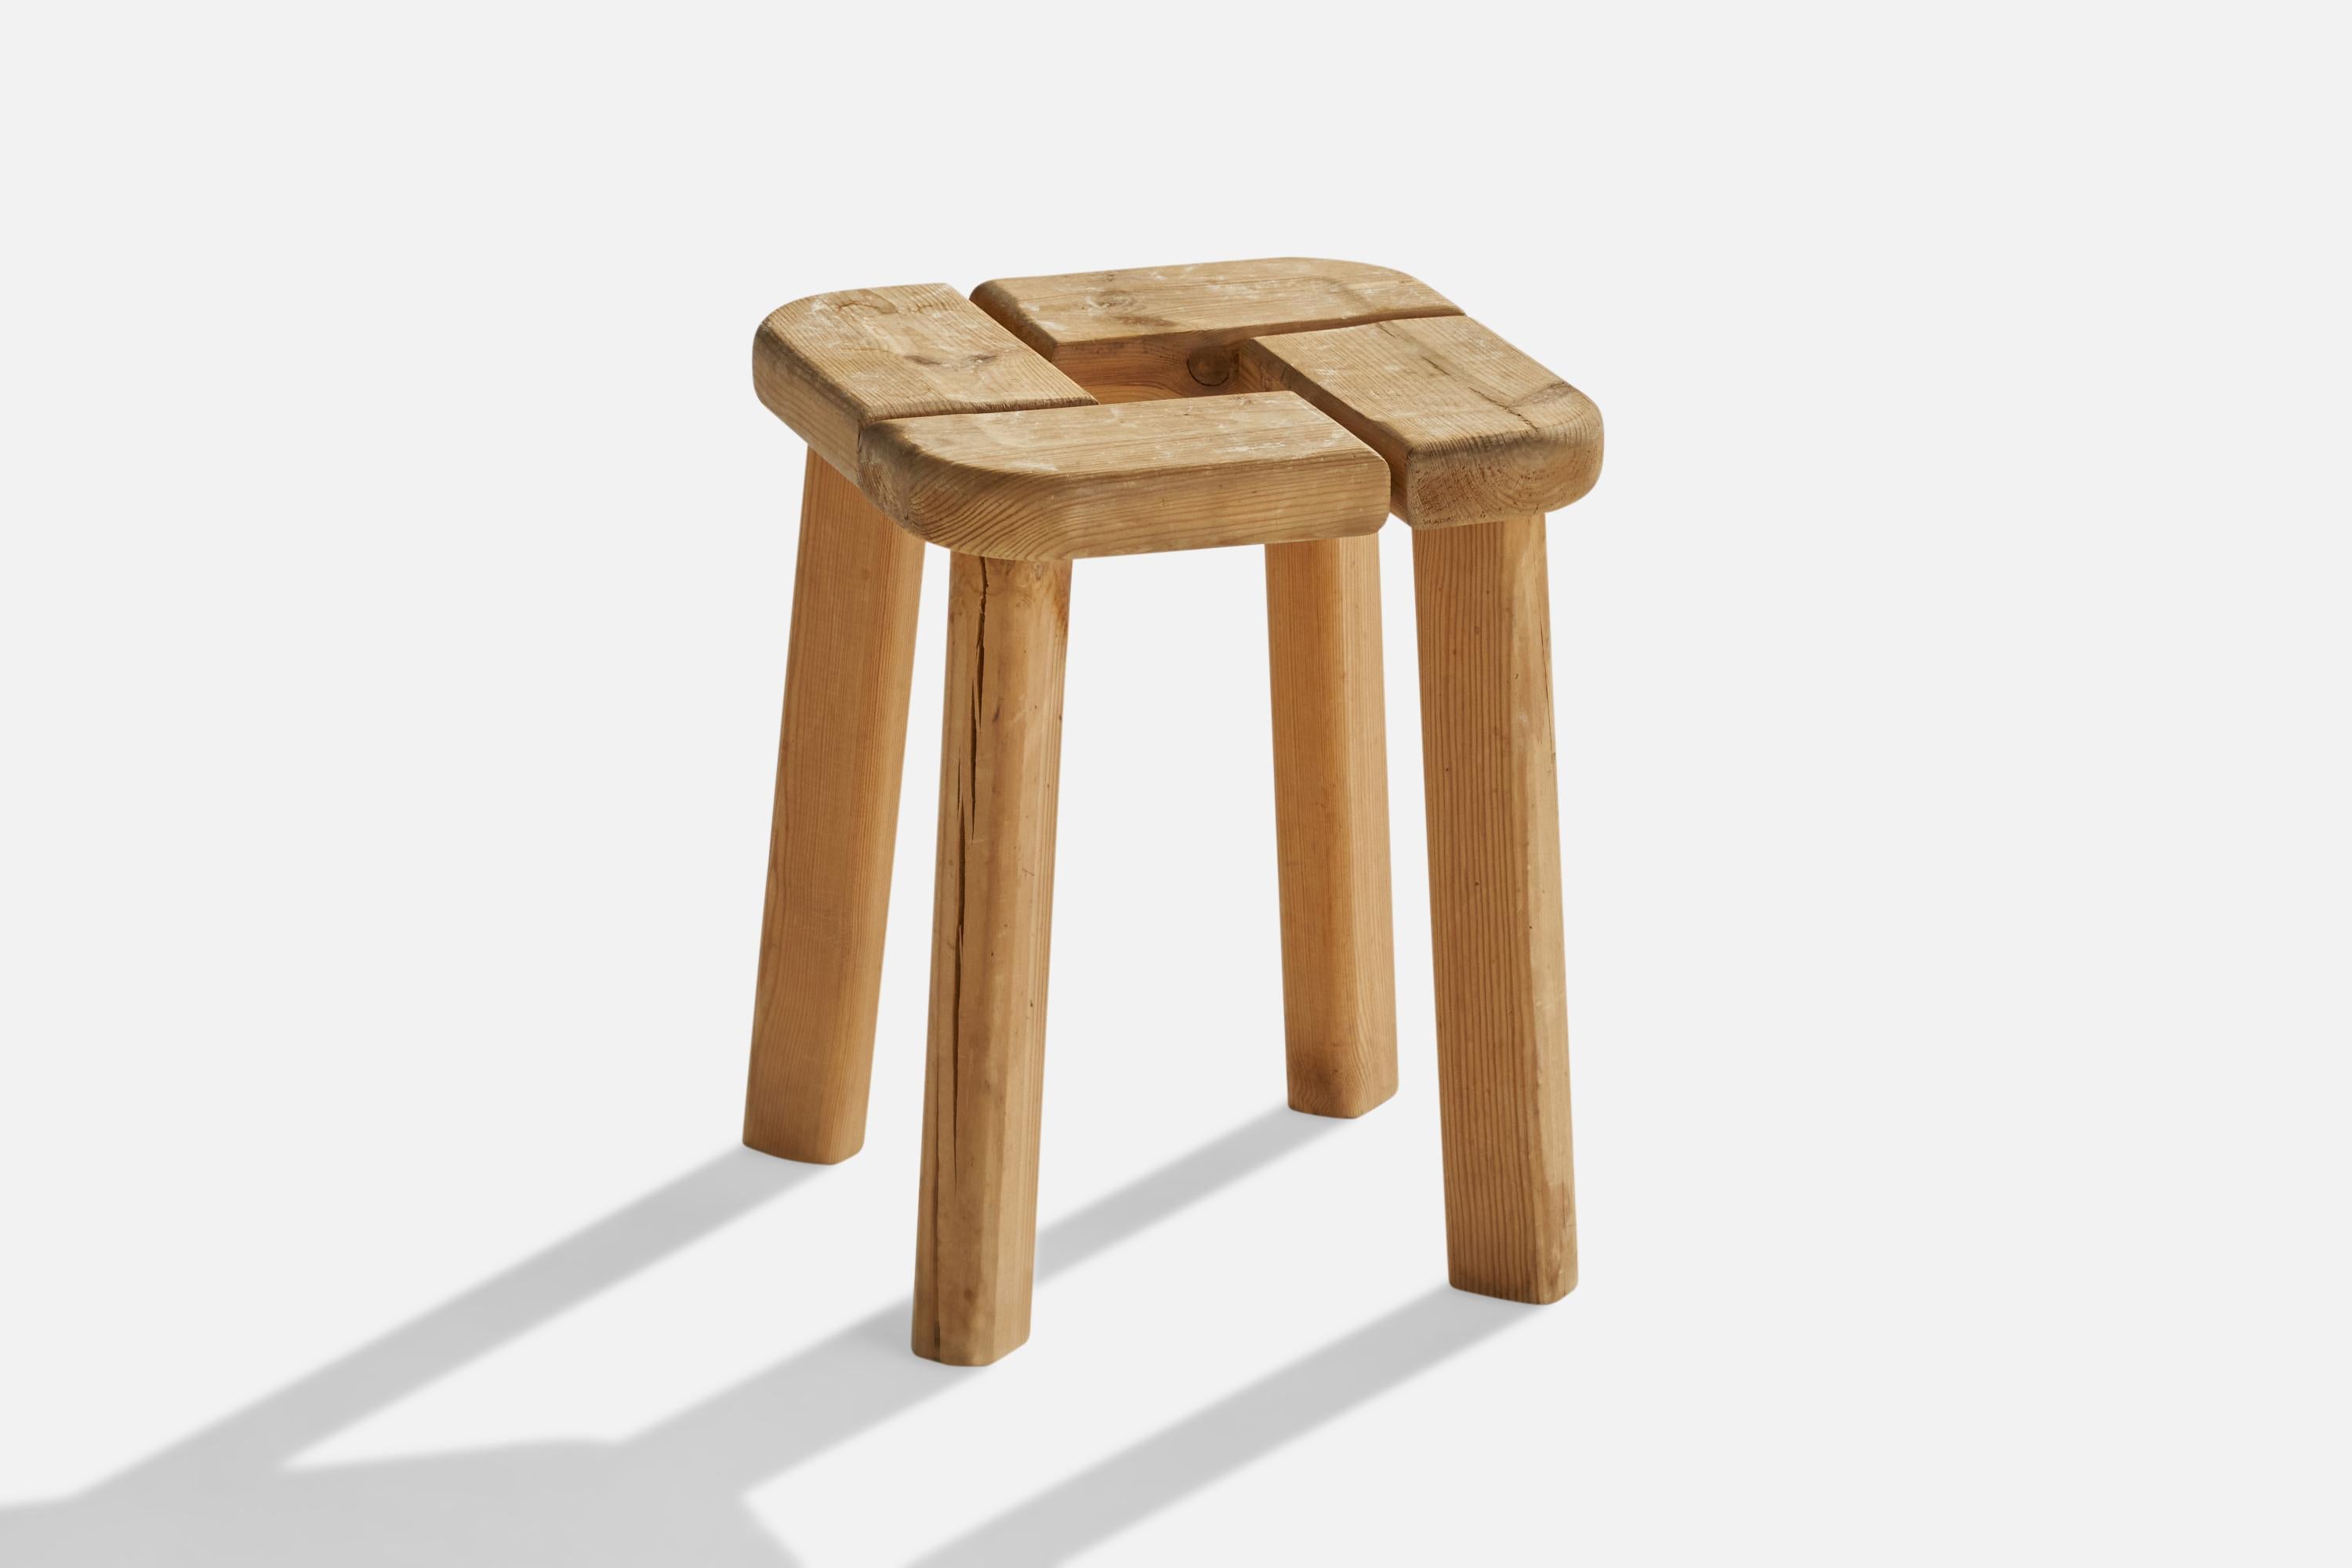 A pine stool designed and produced in Finland, c. 1970s.

seat height: 15.75